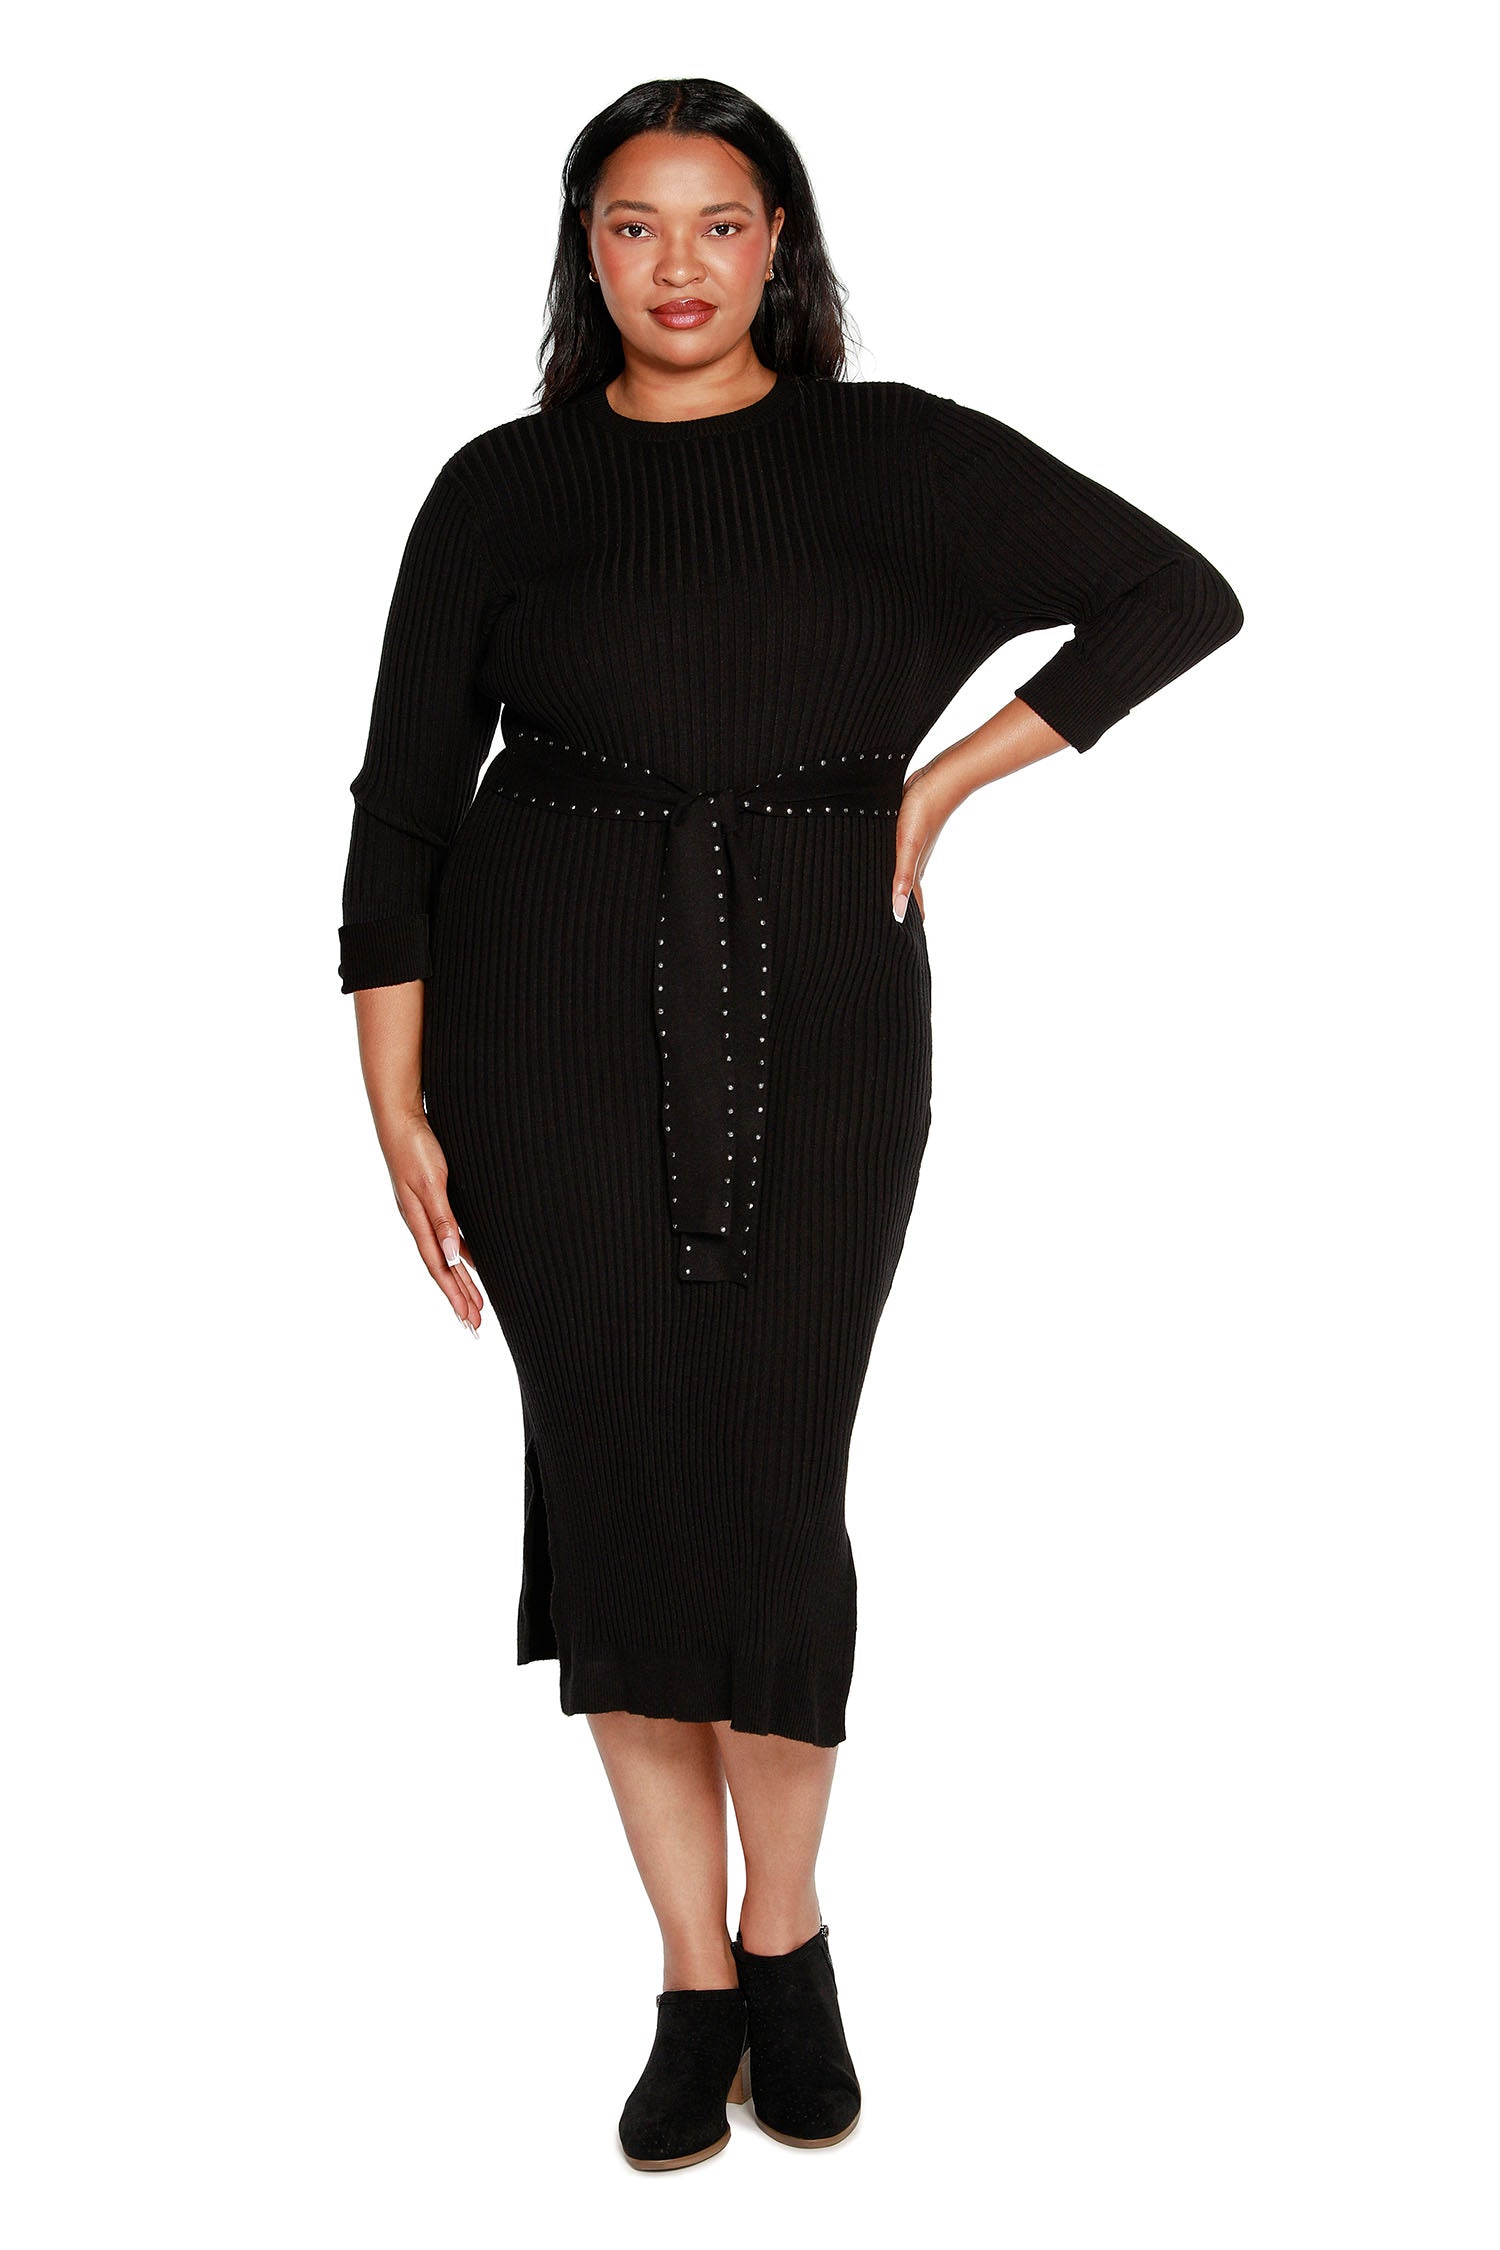 Women's Body Con Sweater Dress with 3/4 Sleeves and Embellished Belt | Curvy